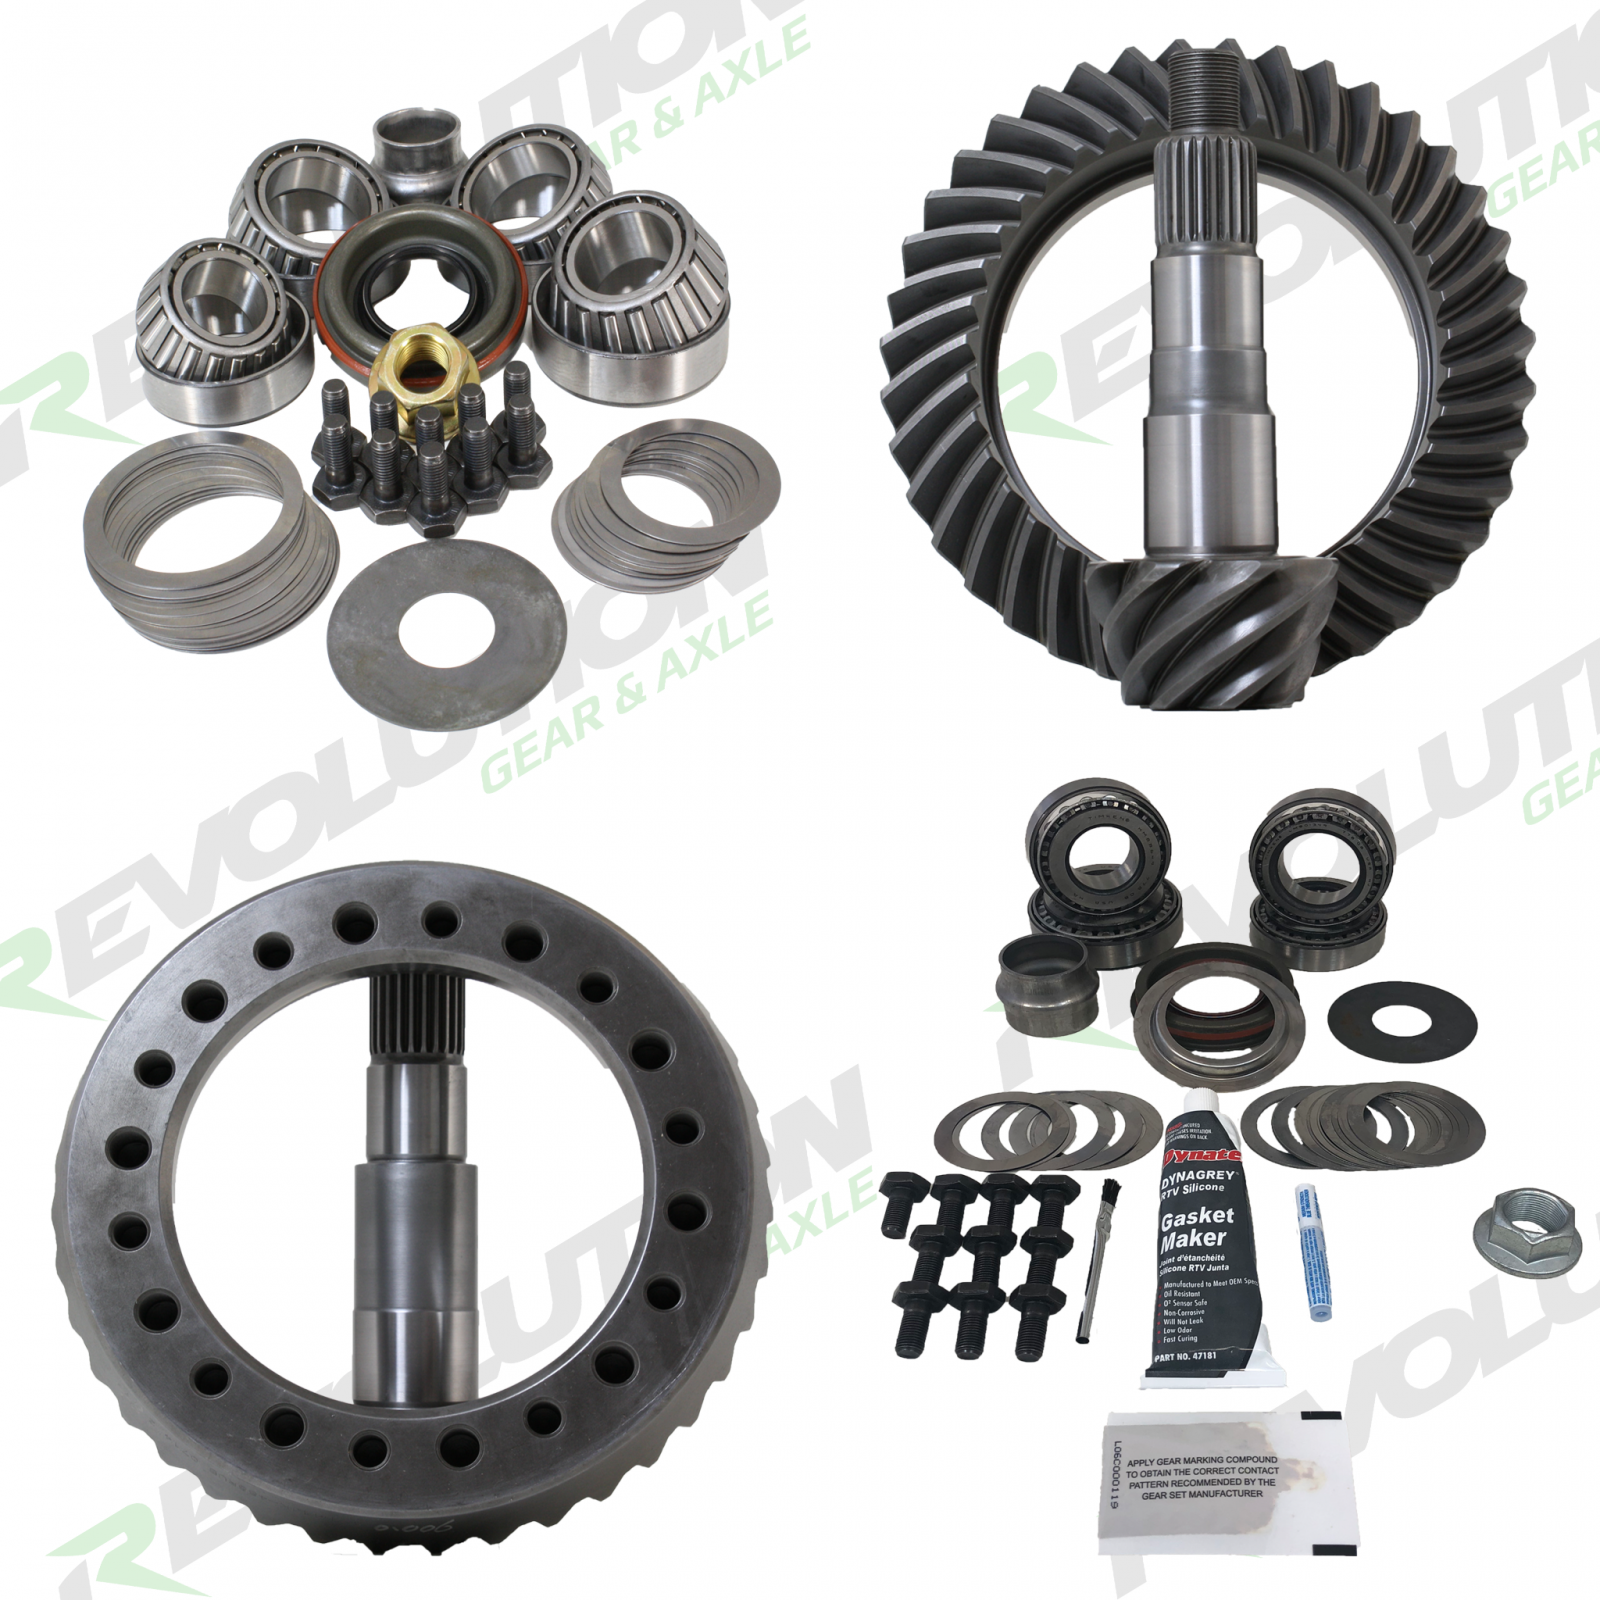 Revolution Gear & Axle Front And Rear Gear Package With Koyo Bearings, Dana 44 Thick-Dana 30, 4.10